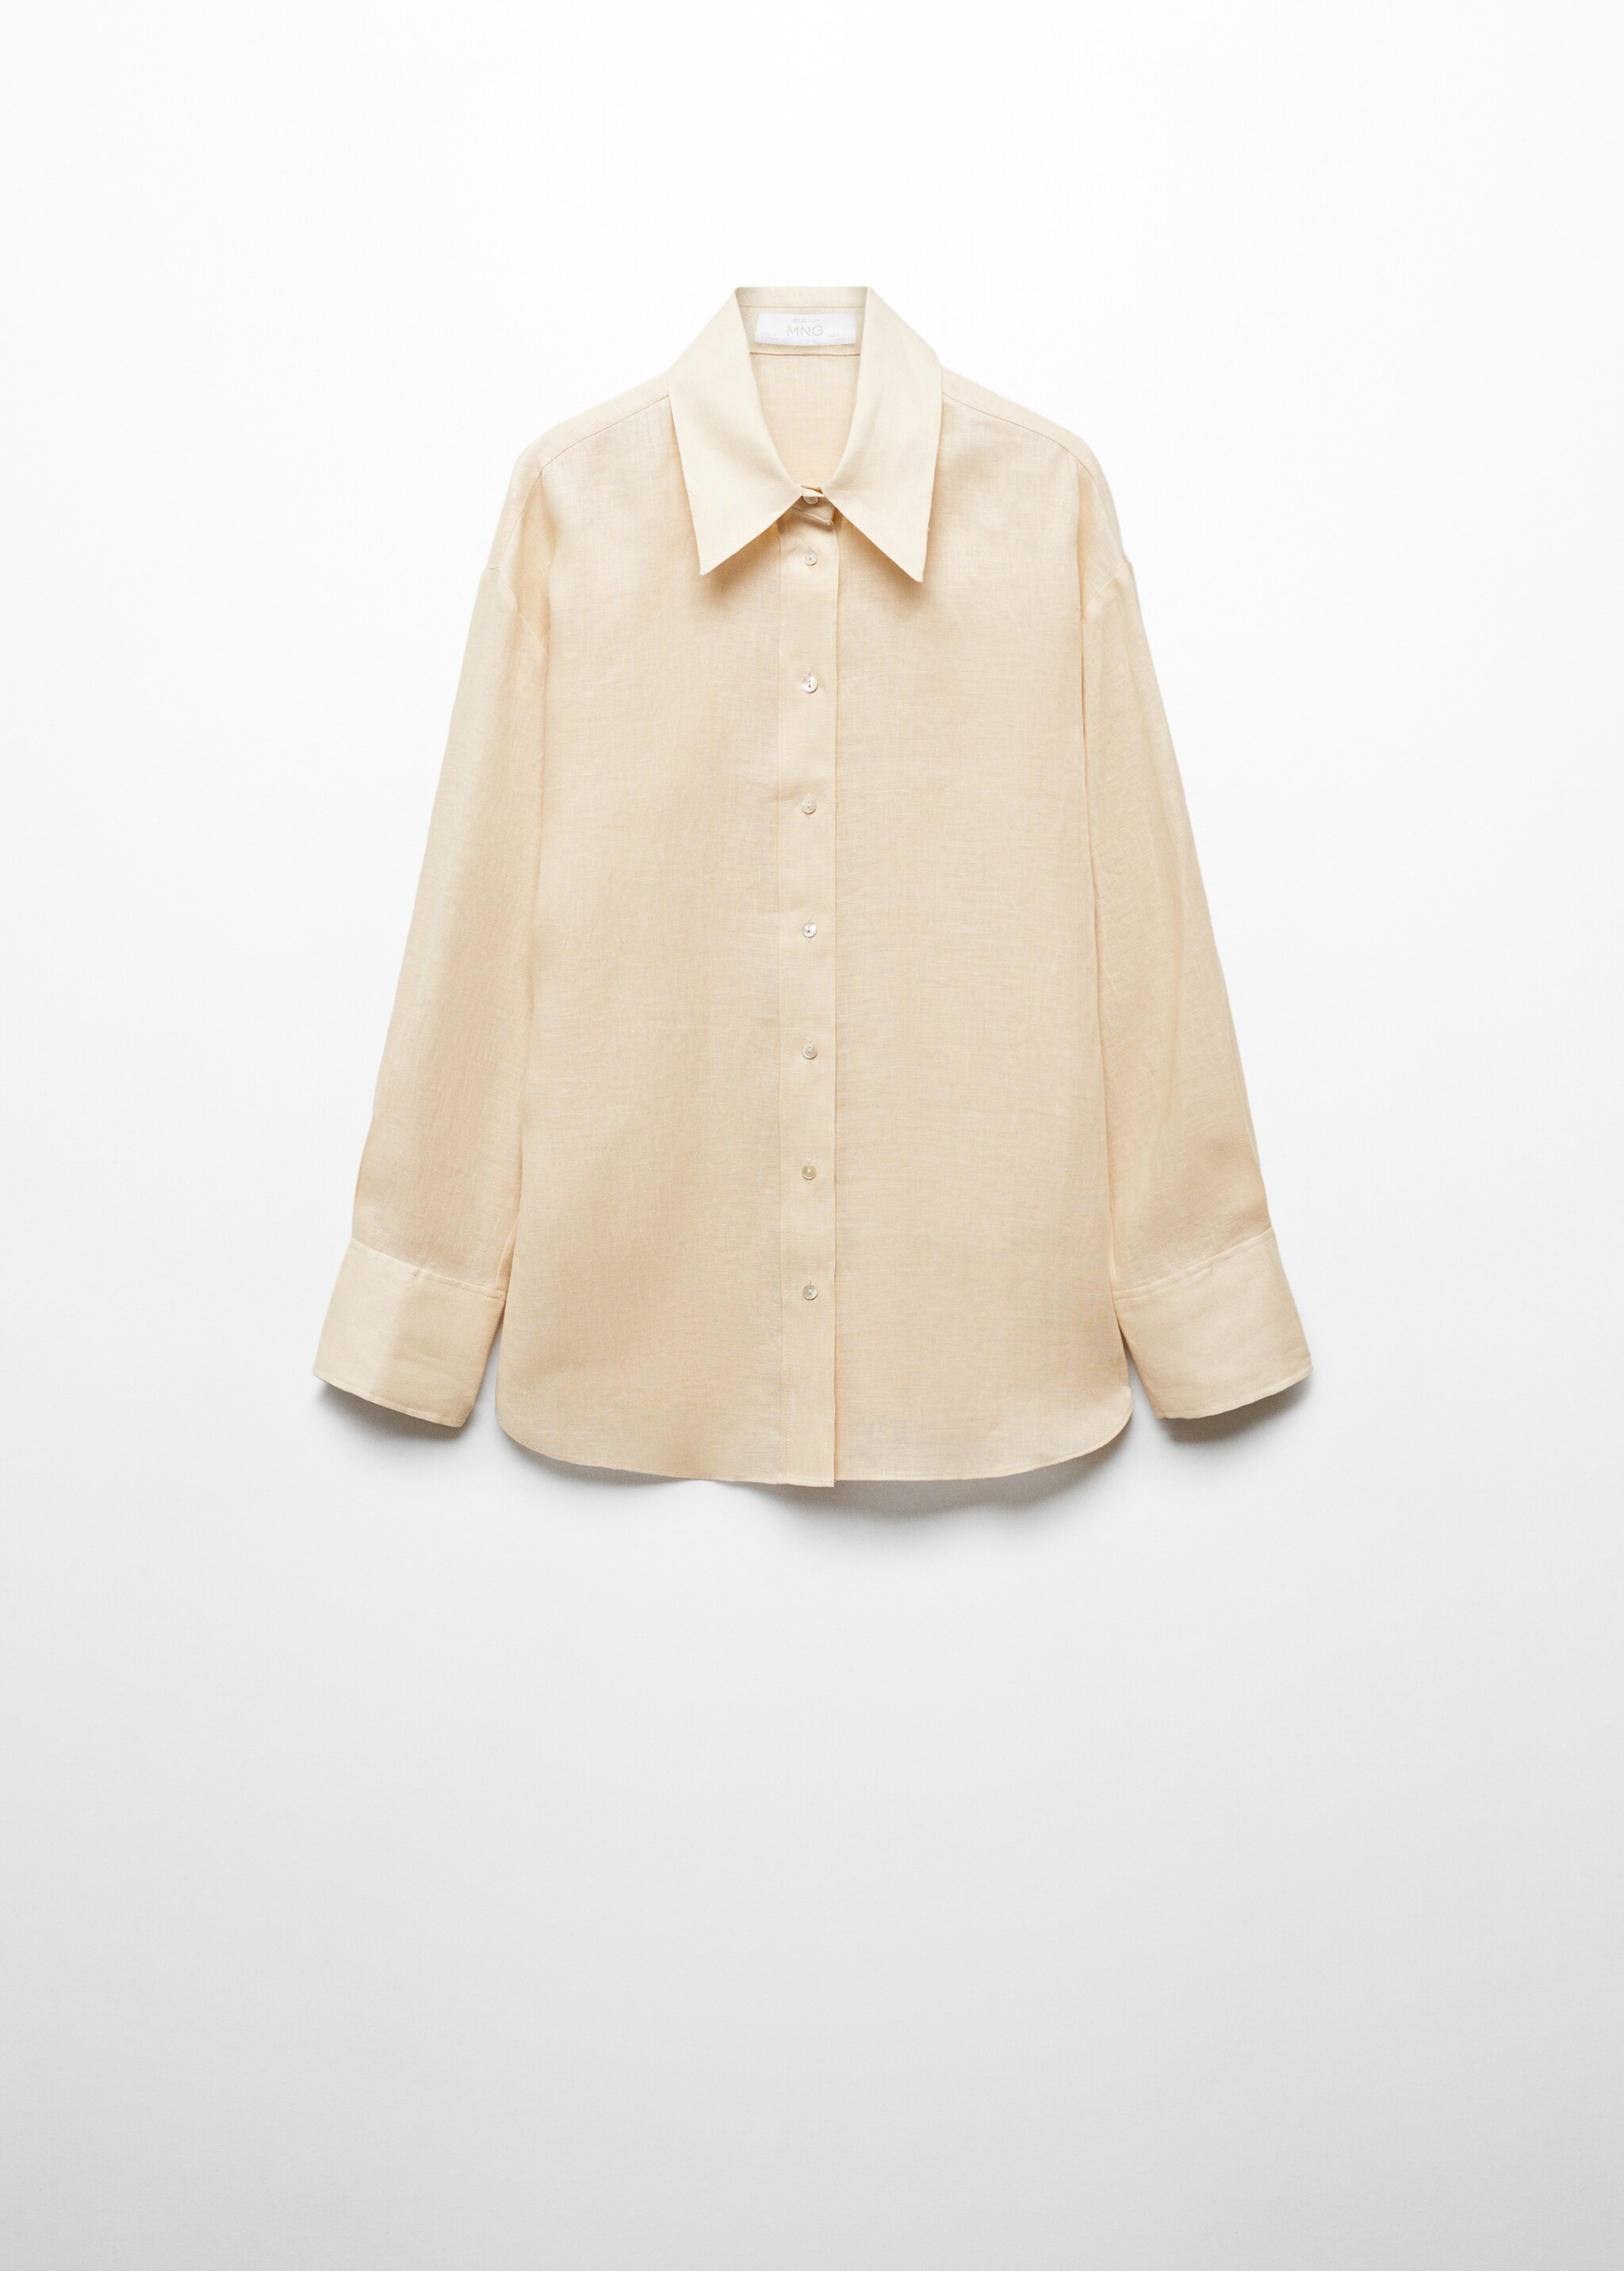 Linen shirt with bow detail - Article without model